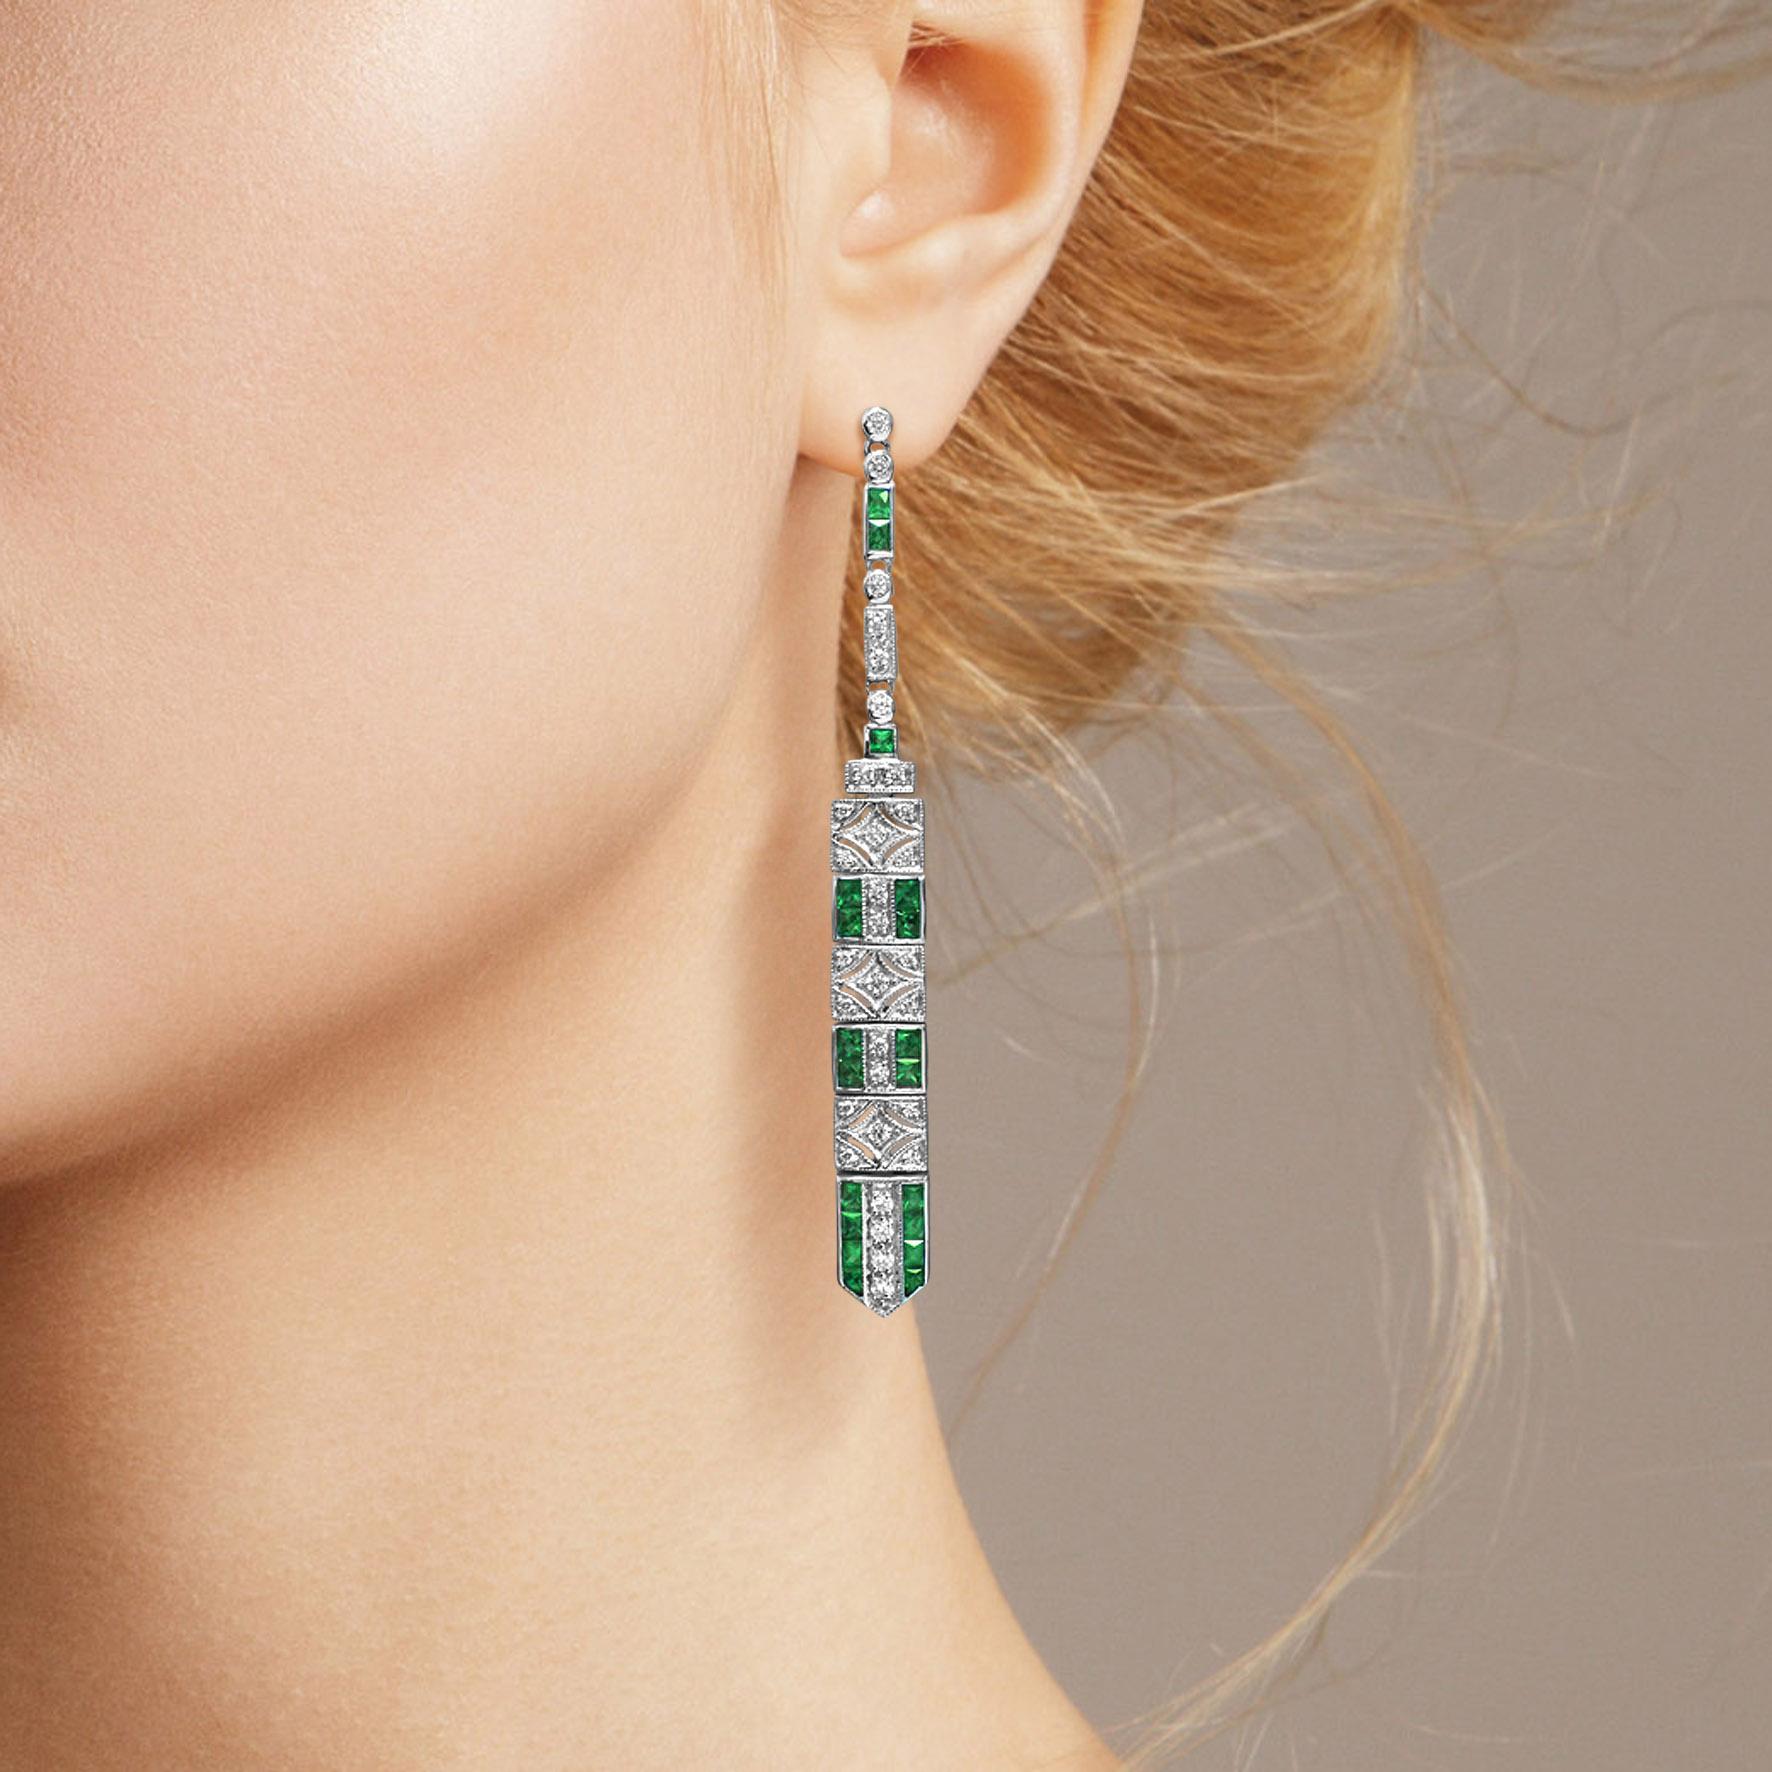 These art deco bar dangle earrings are the epitome of vintage-inspired elegance featuring mesmerizing geometric patterns feature with emeralds and diamonds.

Information
Metal: 14K White Gold
Width: 6 mm.
Length: 62 mm.
Weight: 7.90 g. (approx.